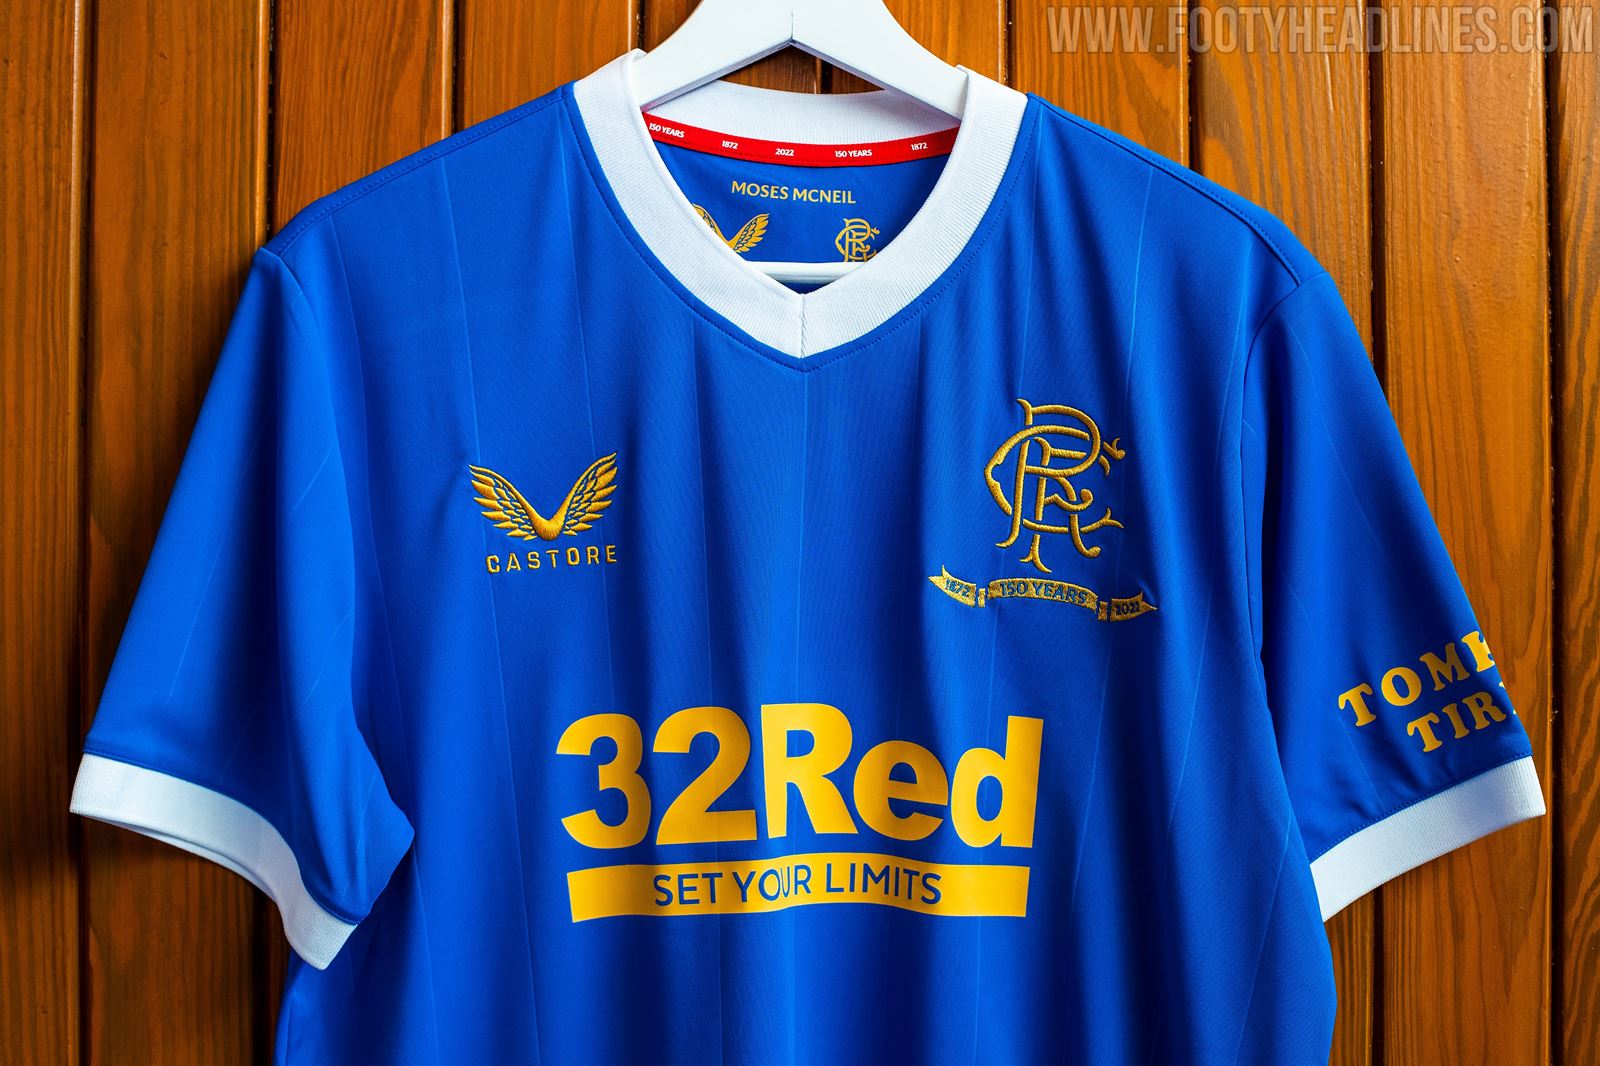 Rangers detail 2021/22 kit launch plans - with special kit confirmed